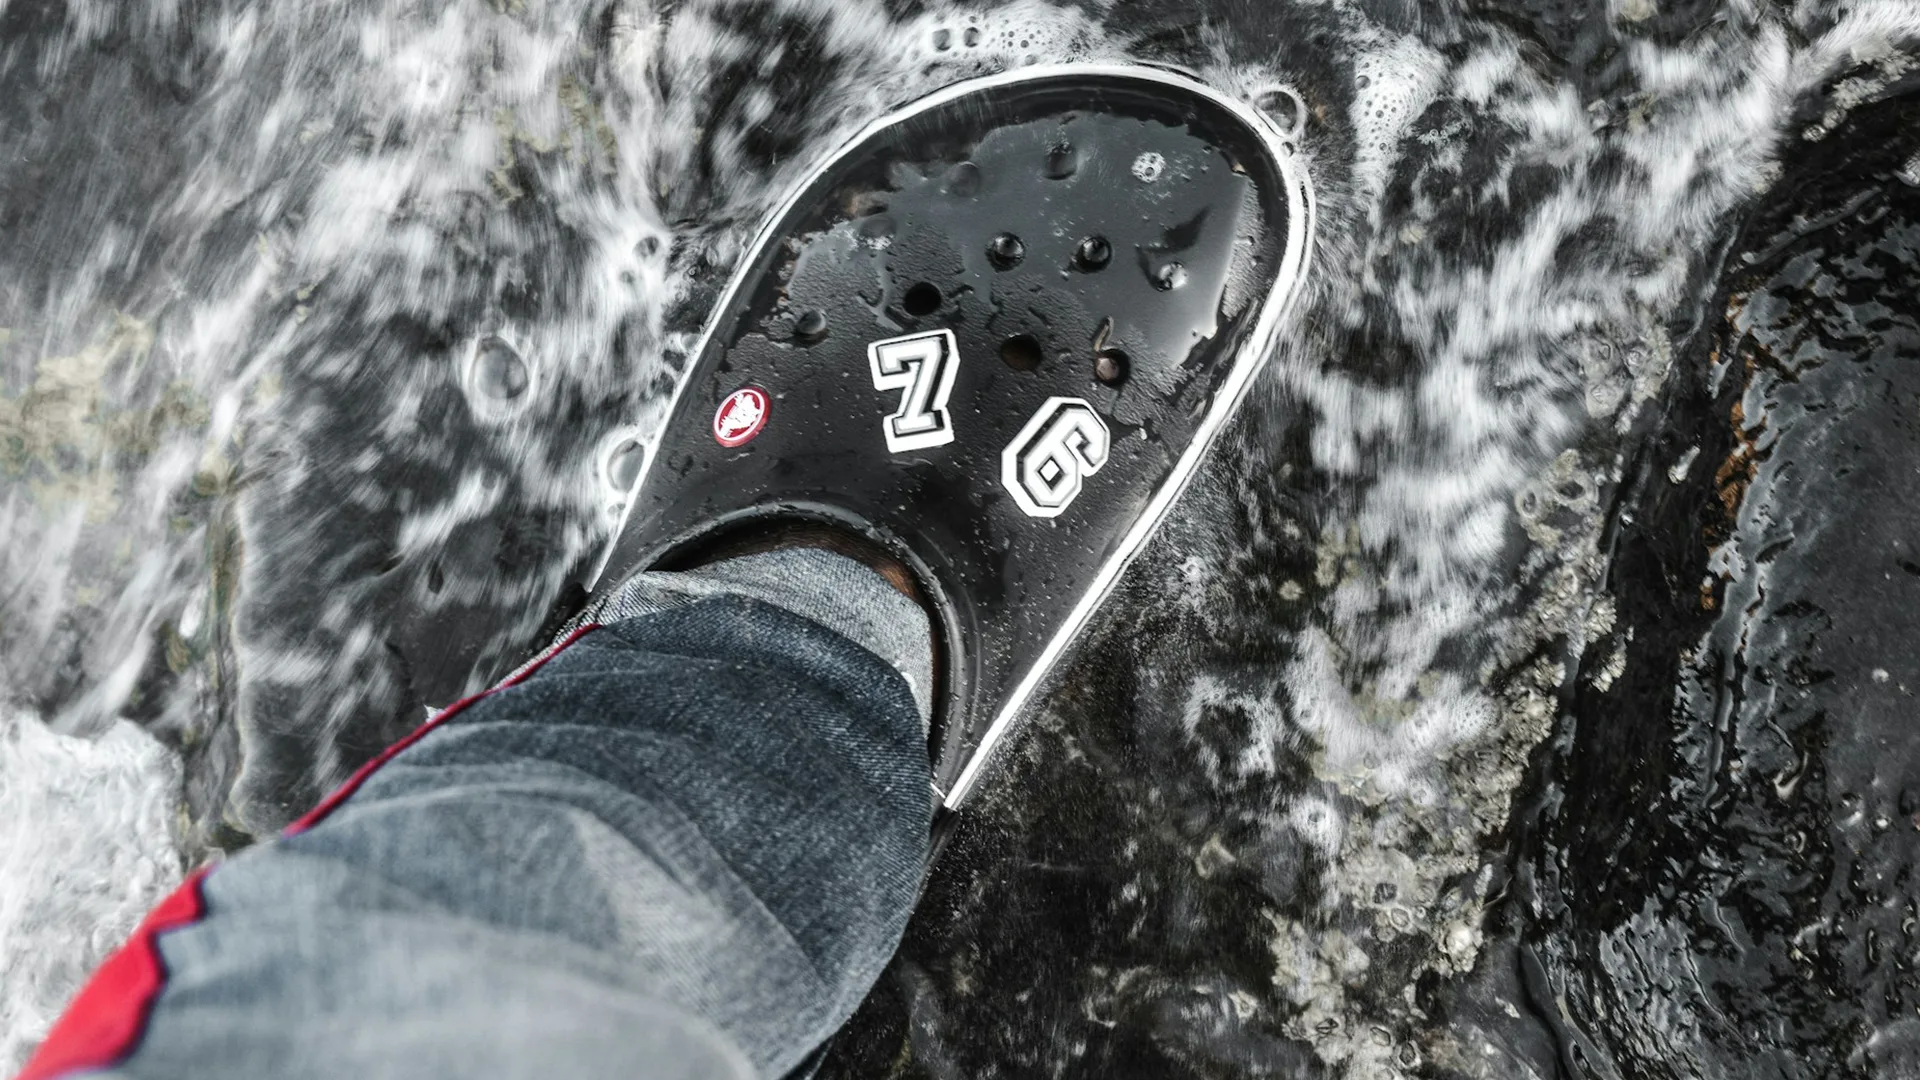 Black croc on watery surface with jibbitz on 